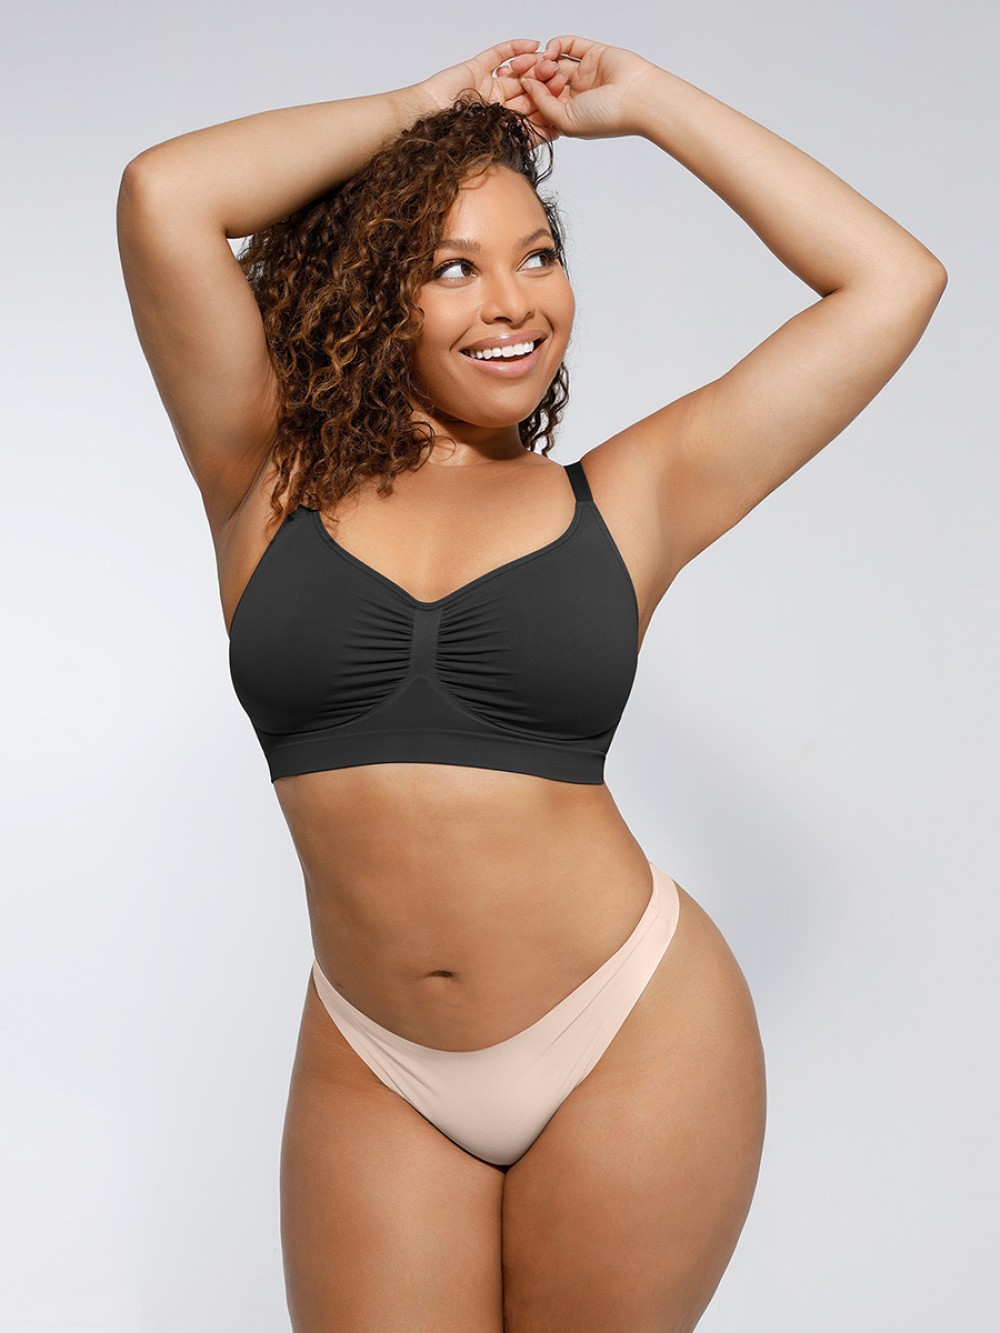 New Seamless Shaping Bra with Adjustable Shoulder Straps